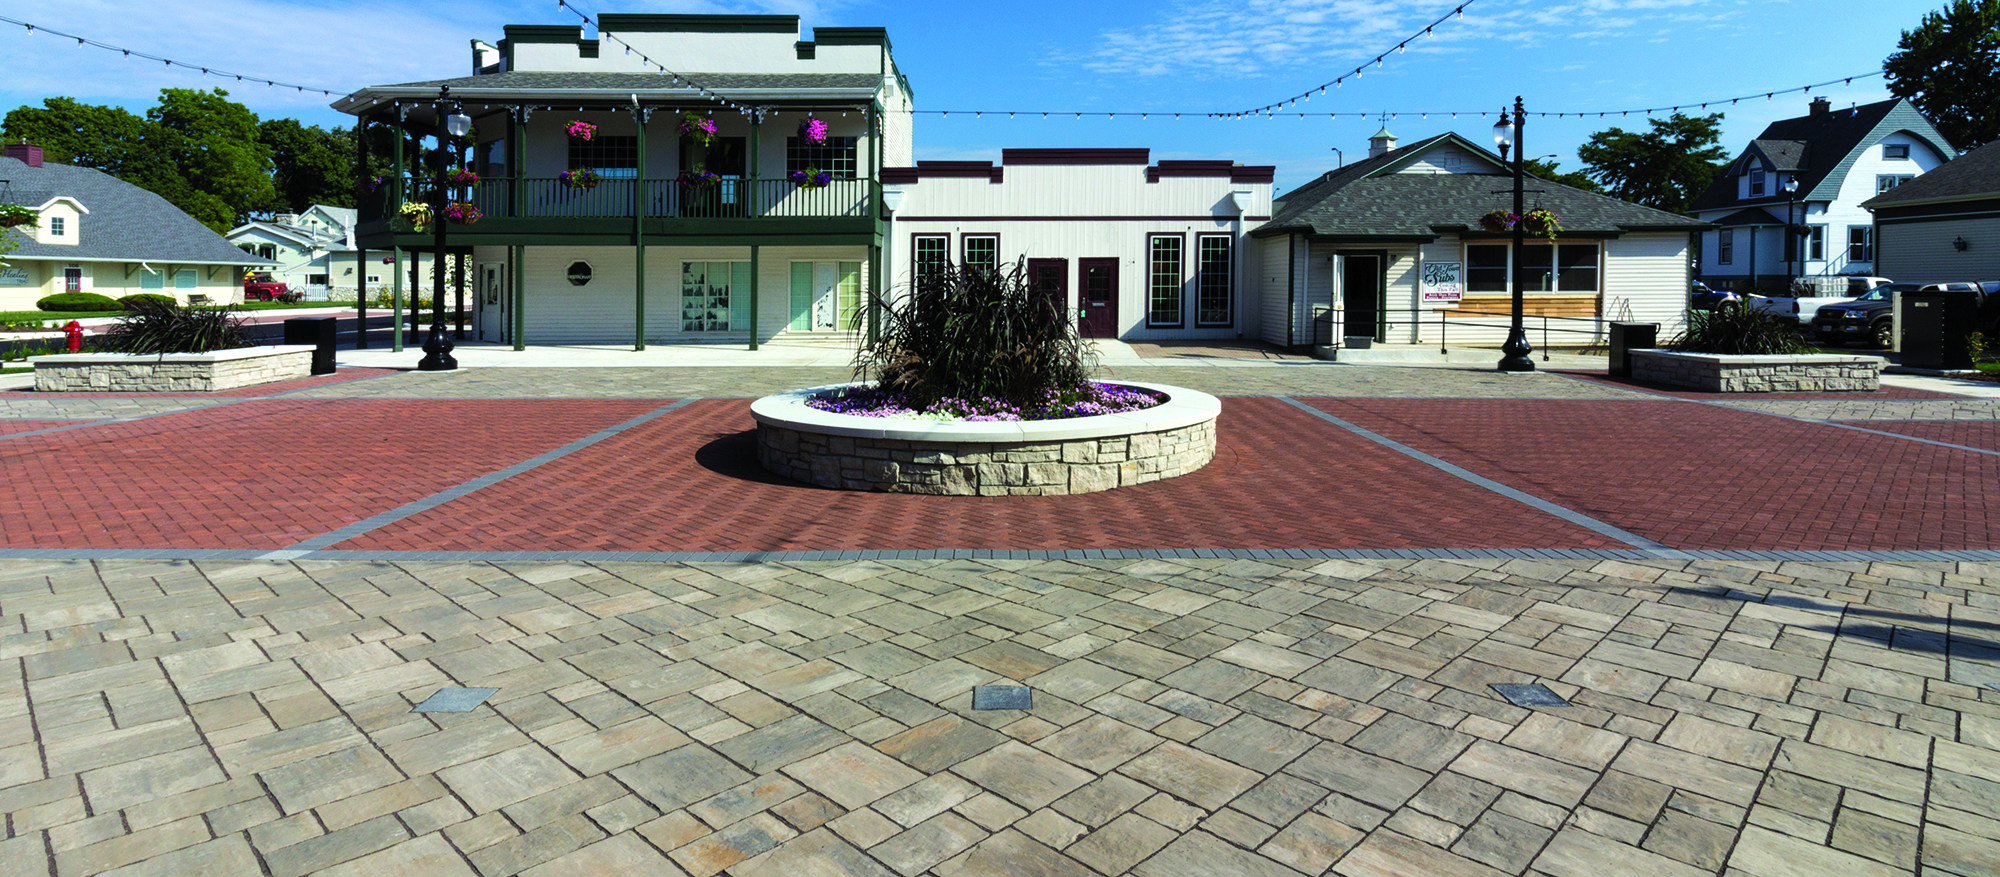 Thornbury and Eco-Priora pavers in geometric shapes and contrasting colors create a pedestrian area with a circular walled garden in the middle.